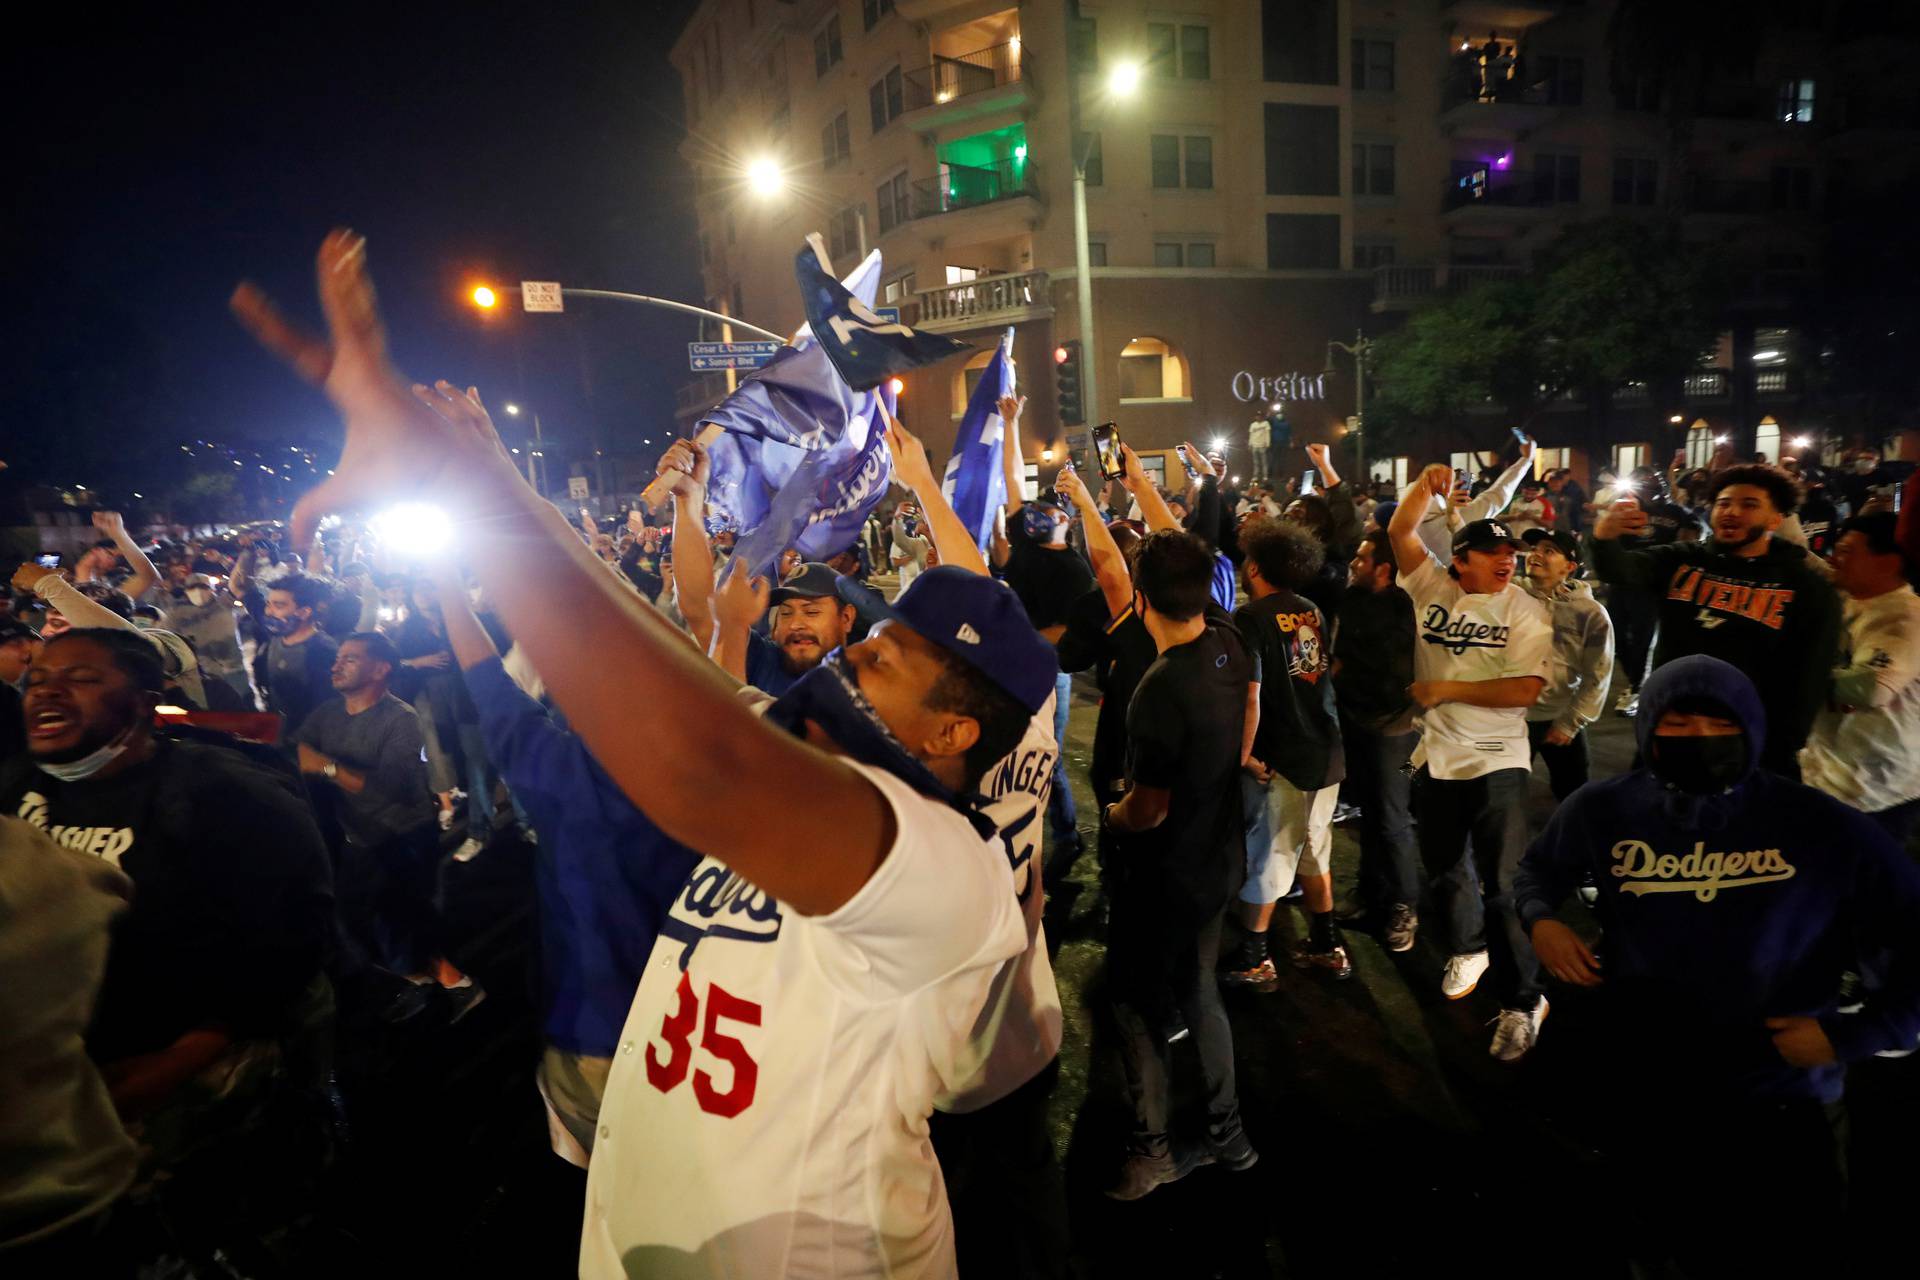 People celebrate Los Angeles Dodgers' victory at the end of game 6 of the 2020 World Series between Los Angeles Dodgers and Tampa Bay Rays, in Los Angeles, California